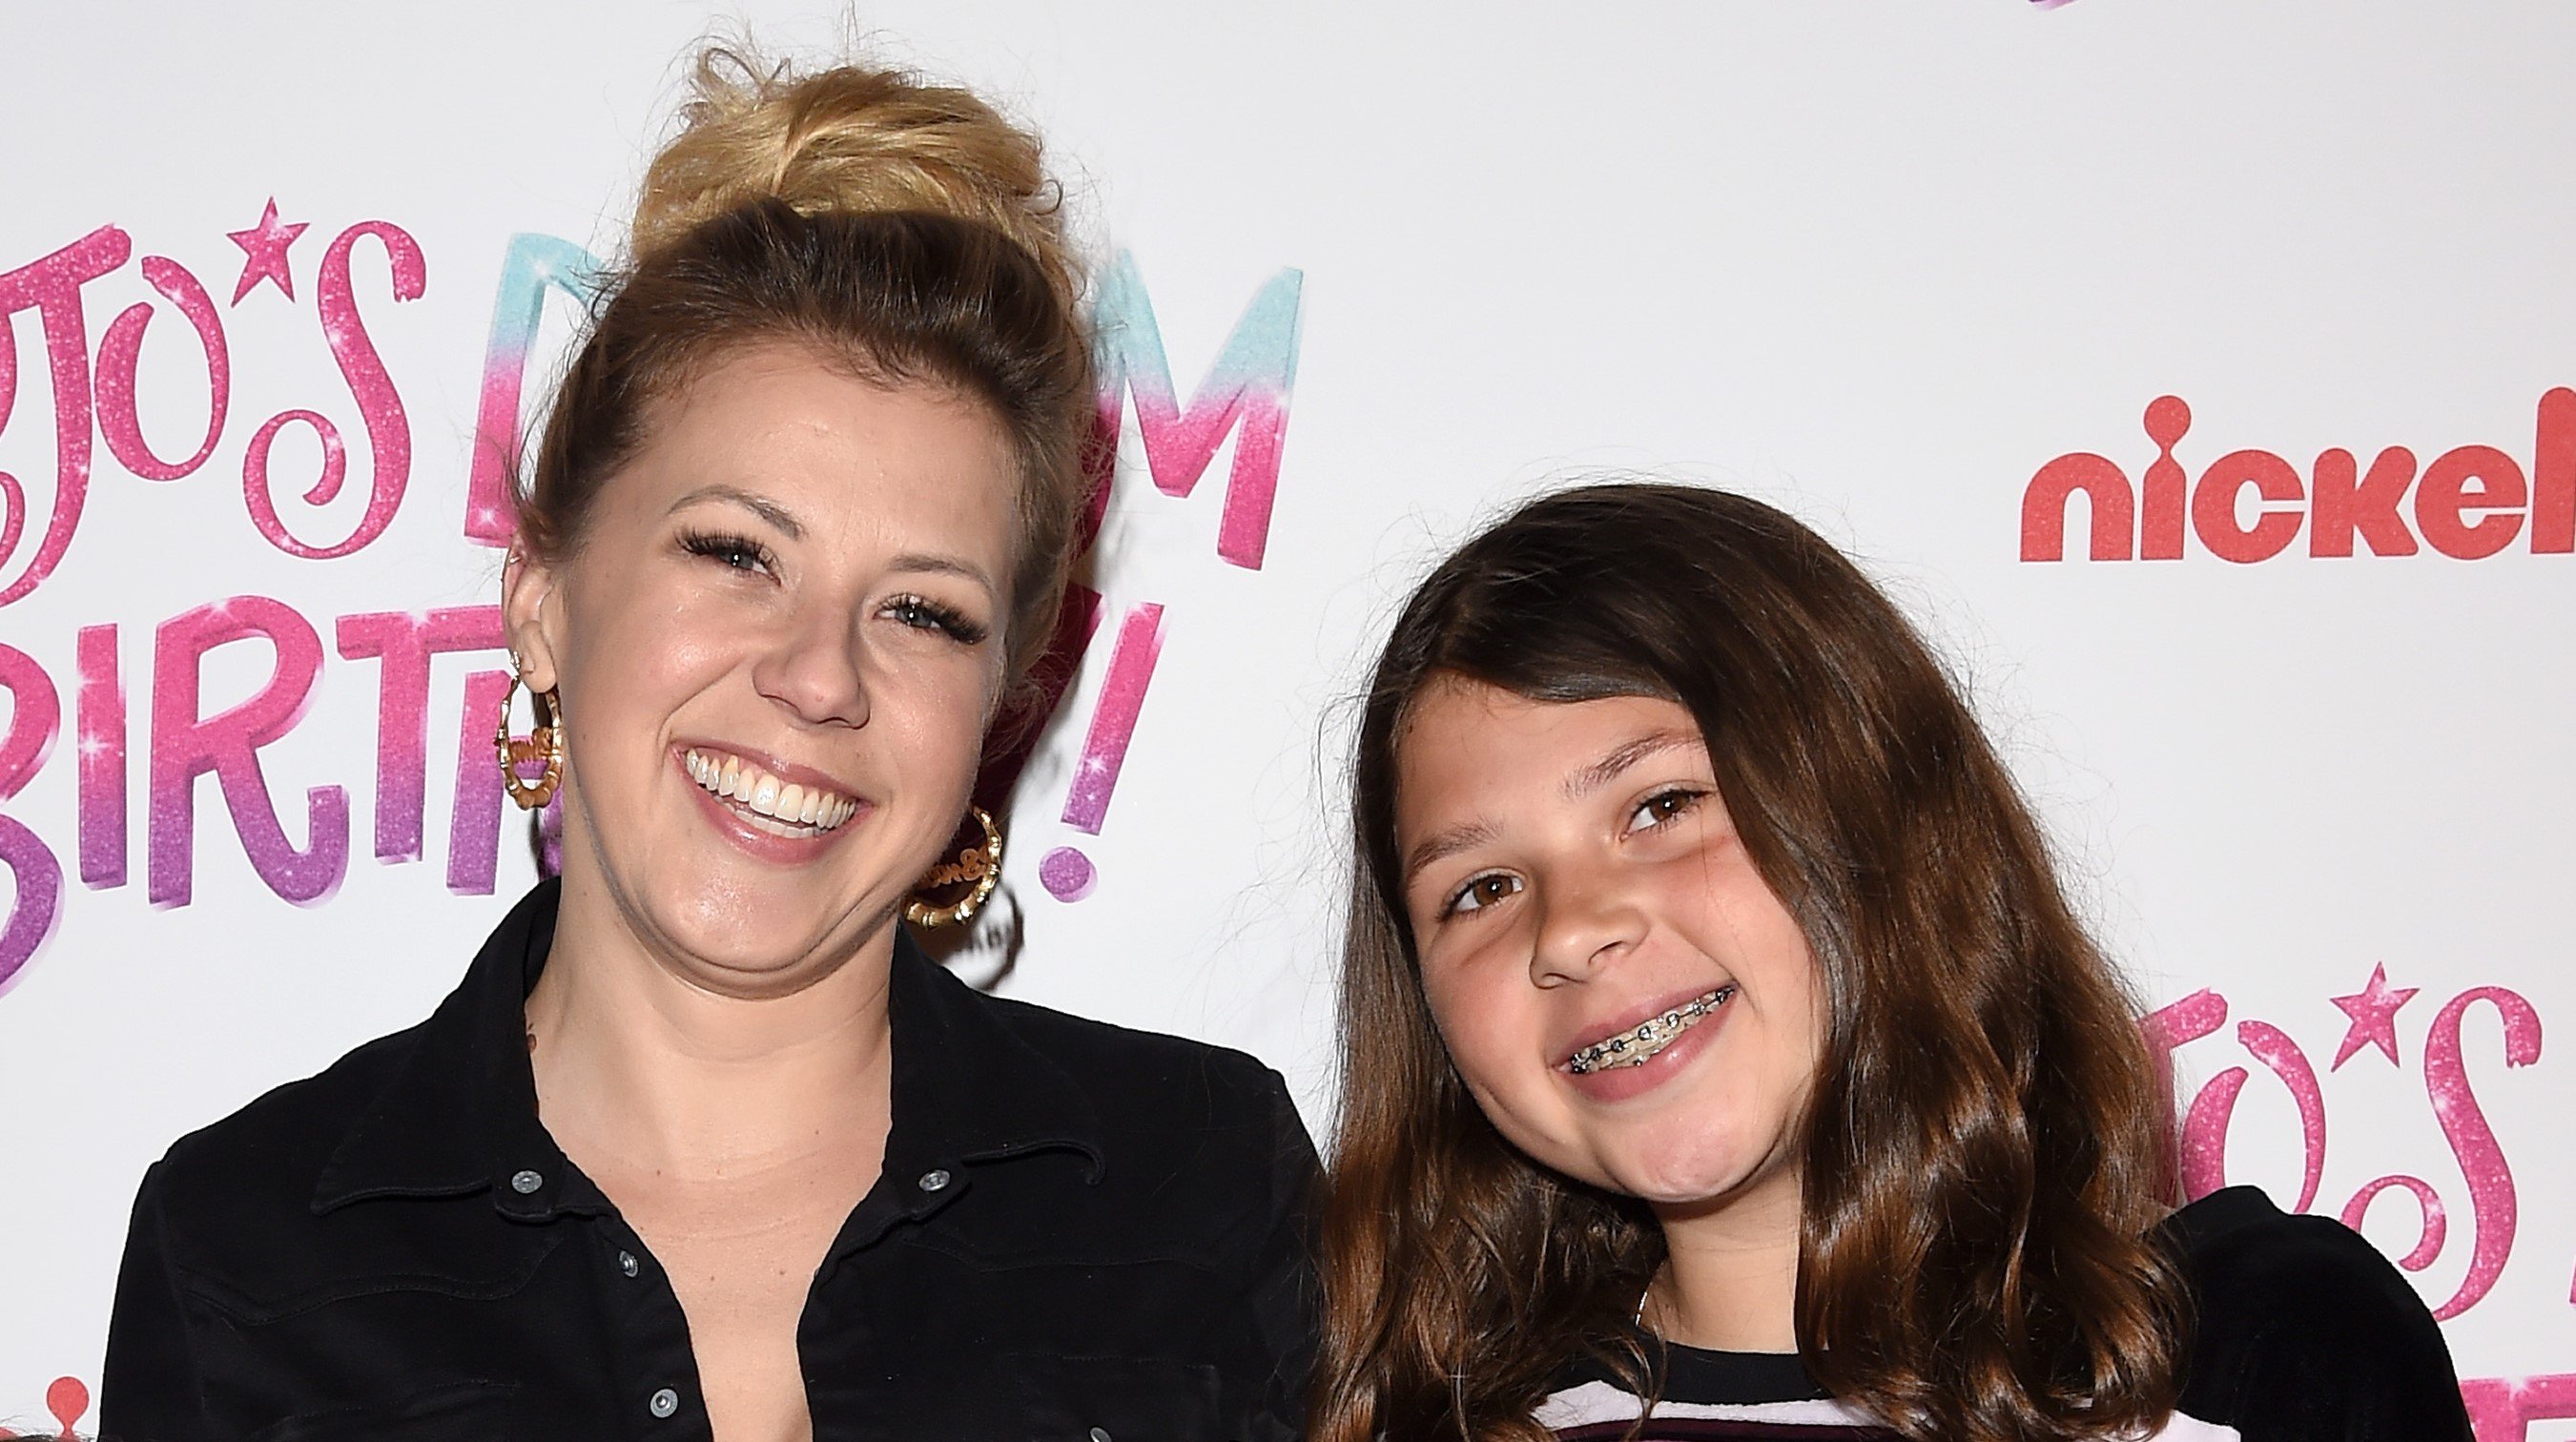 Jodie Sweetin and Zoie Laurel May Herpin at JoJo Siwa's Sweet 16 Birthday celebration in 2019 in Hollywood. | Source: Getty Images